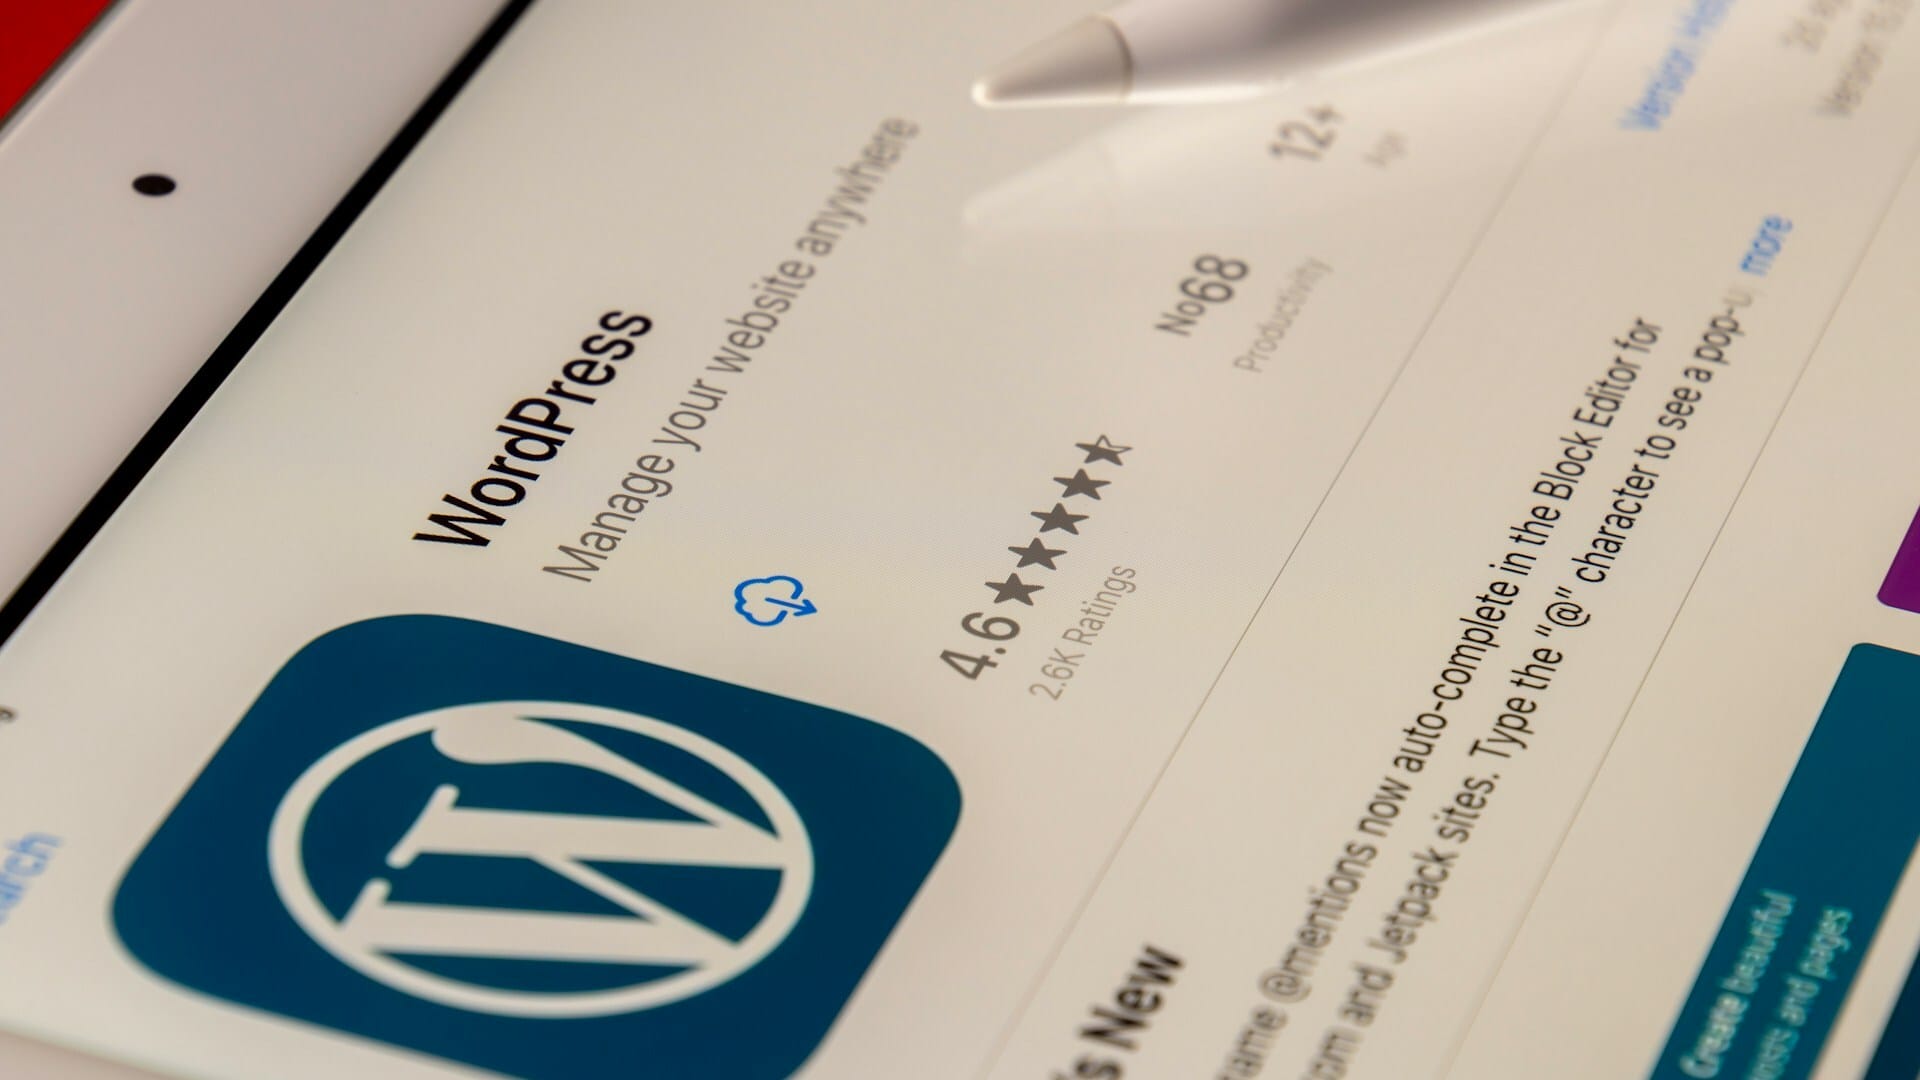 WordPress and Bluehost unveil managed cloud hosting for unparalleled performance